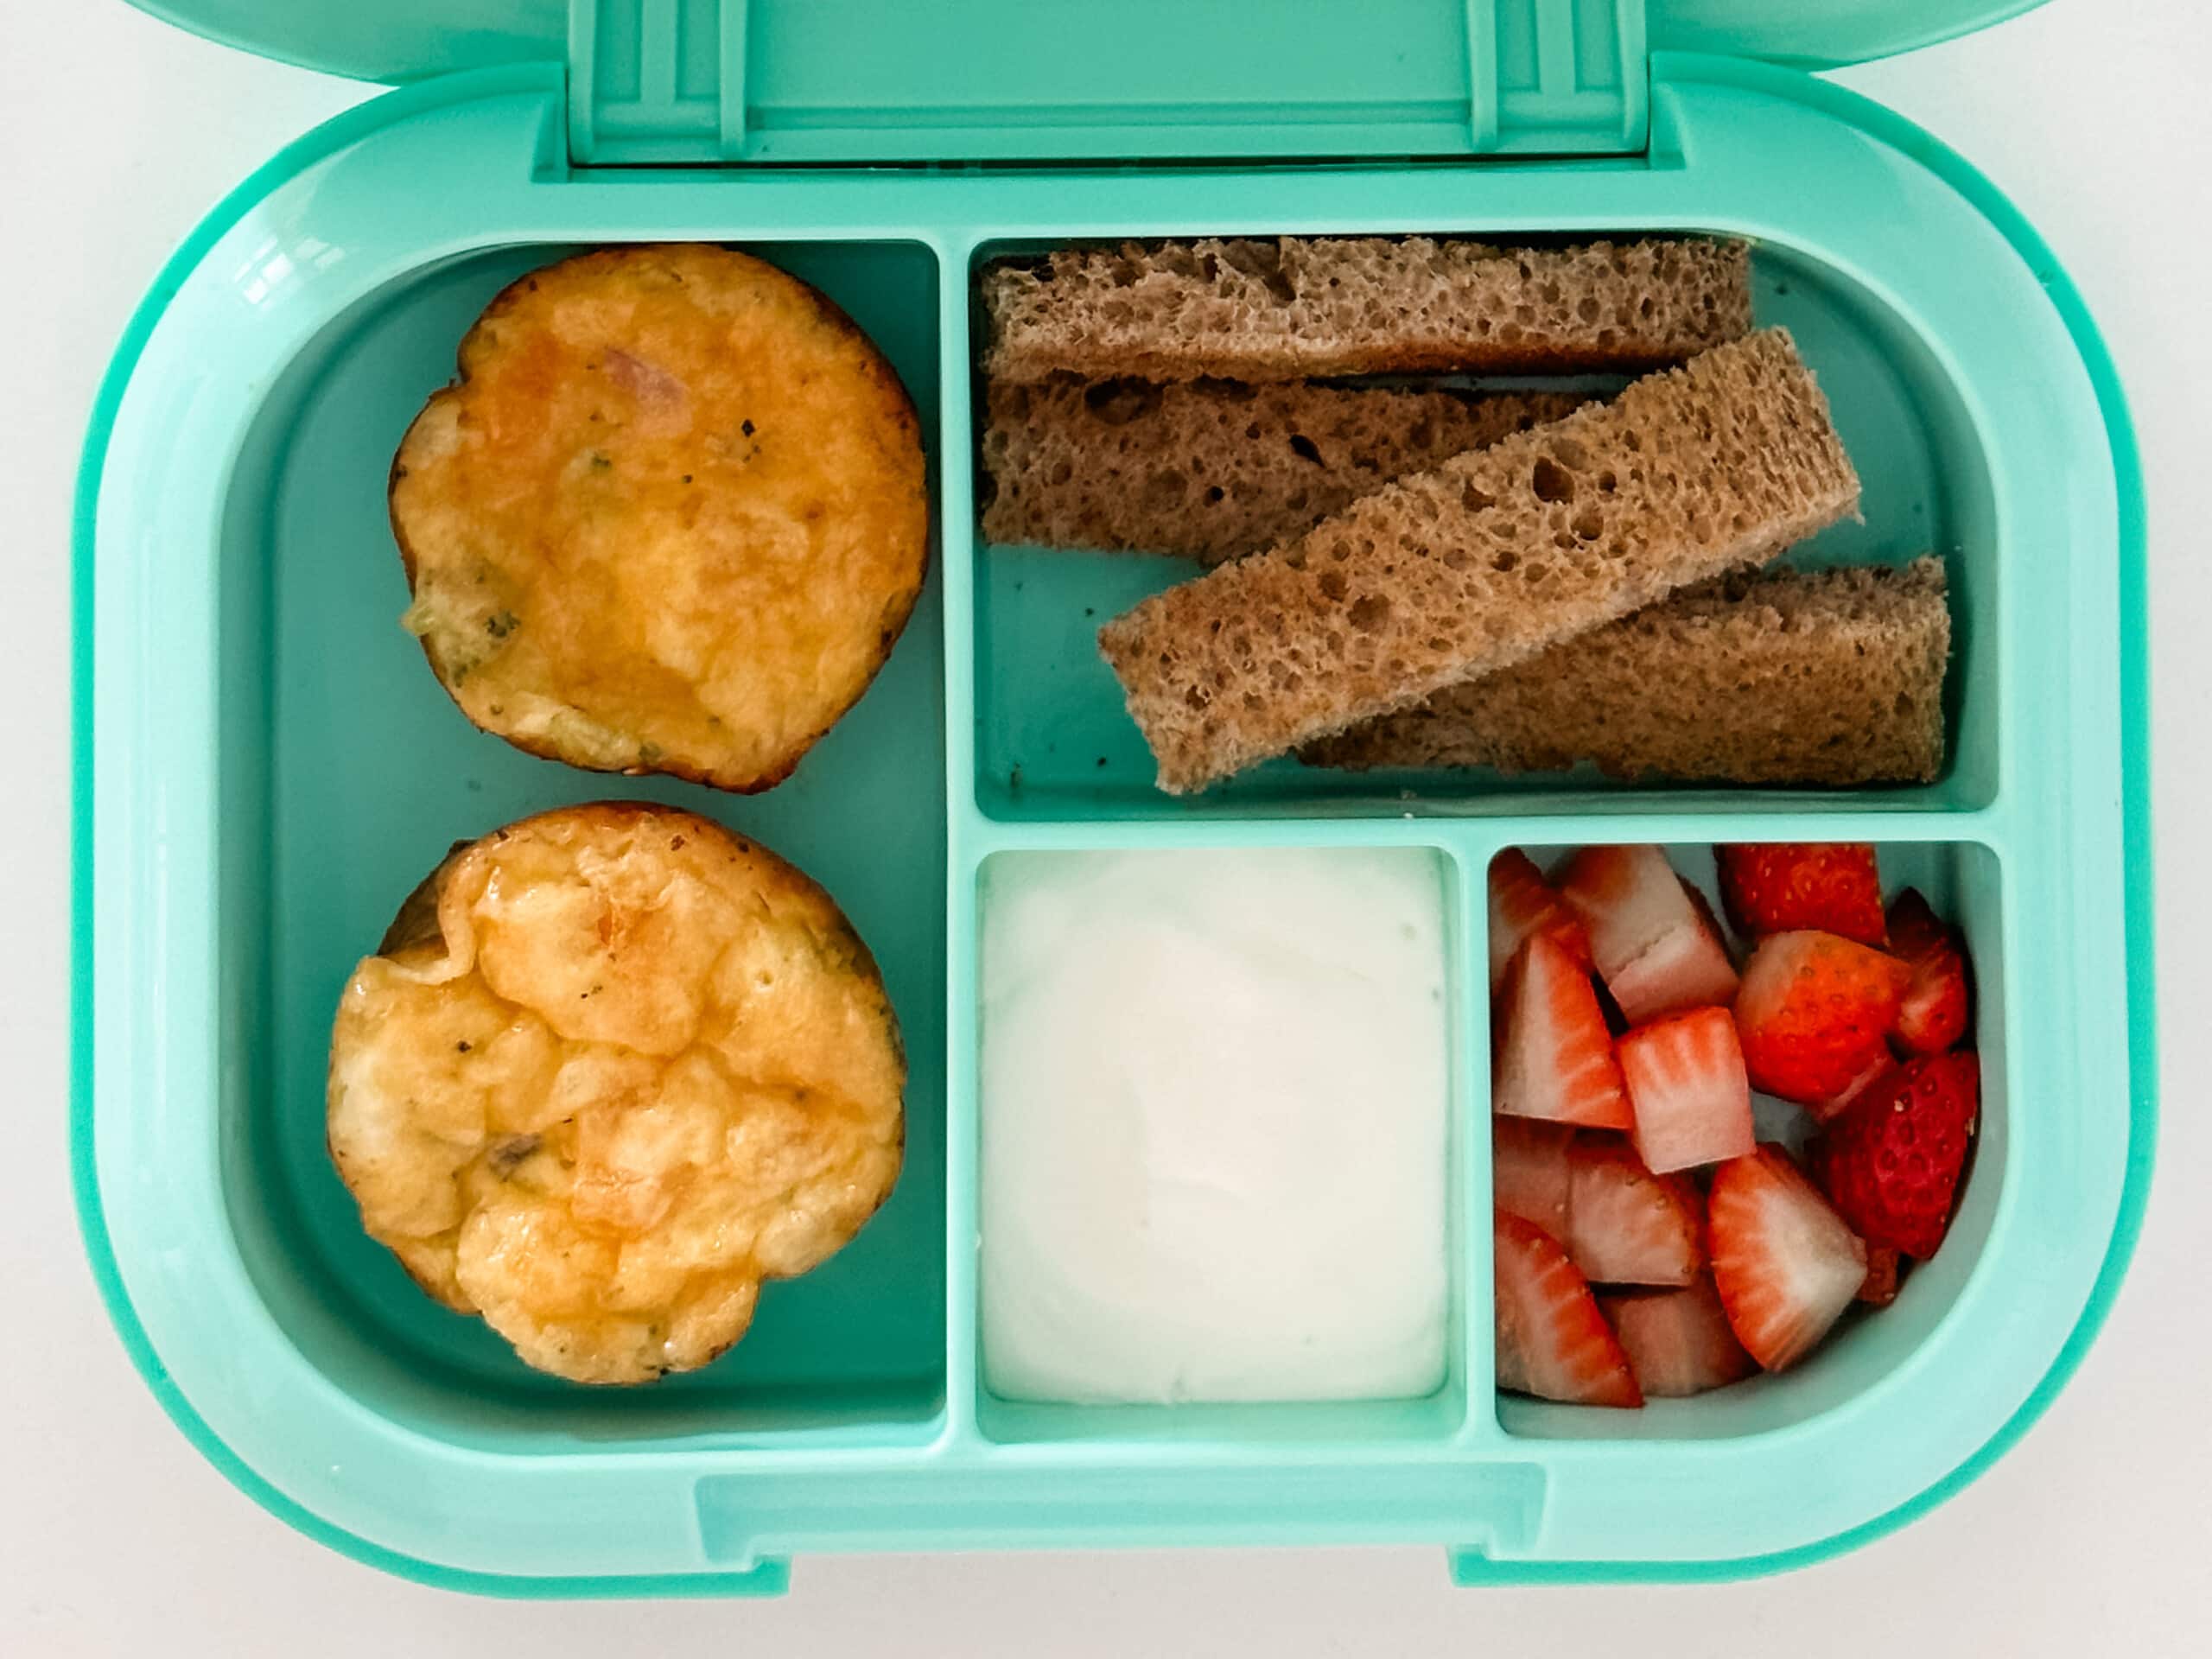 Mint green bento box for kids filled with egg muffins, toast, strawberries, and yogurt